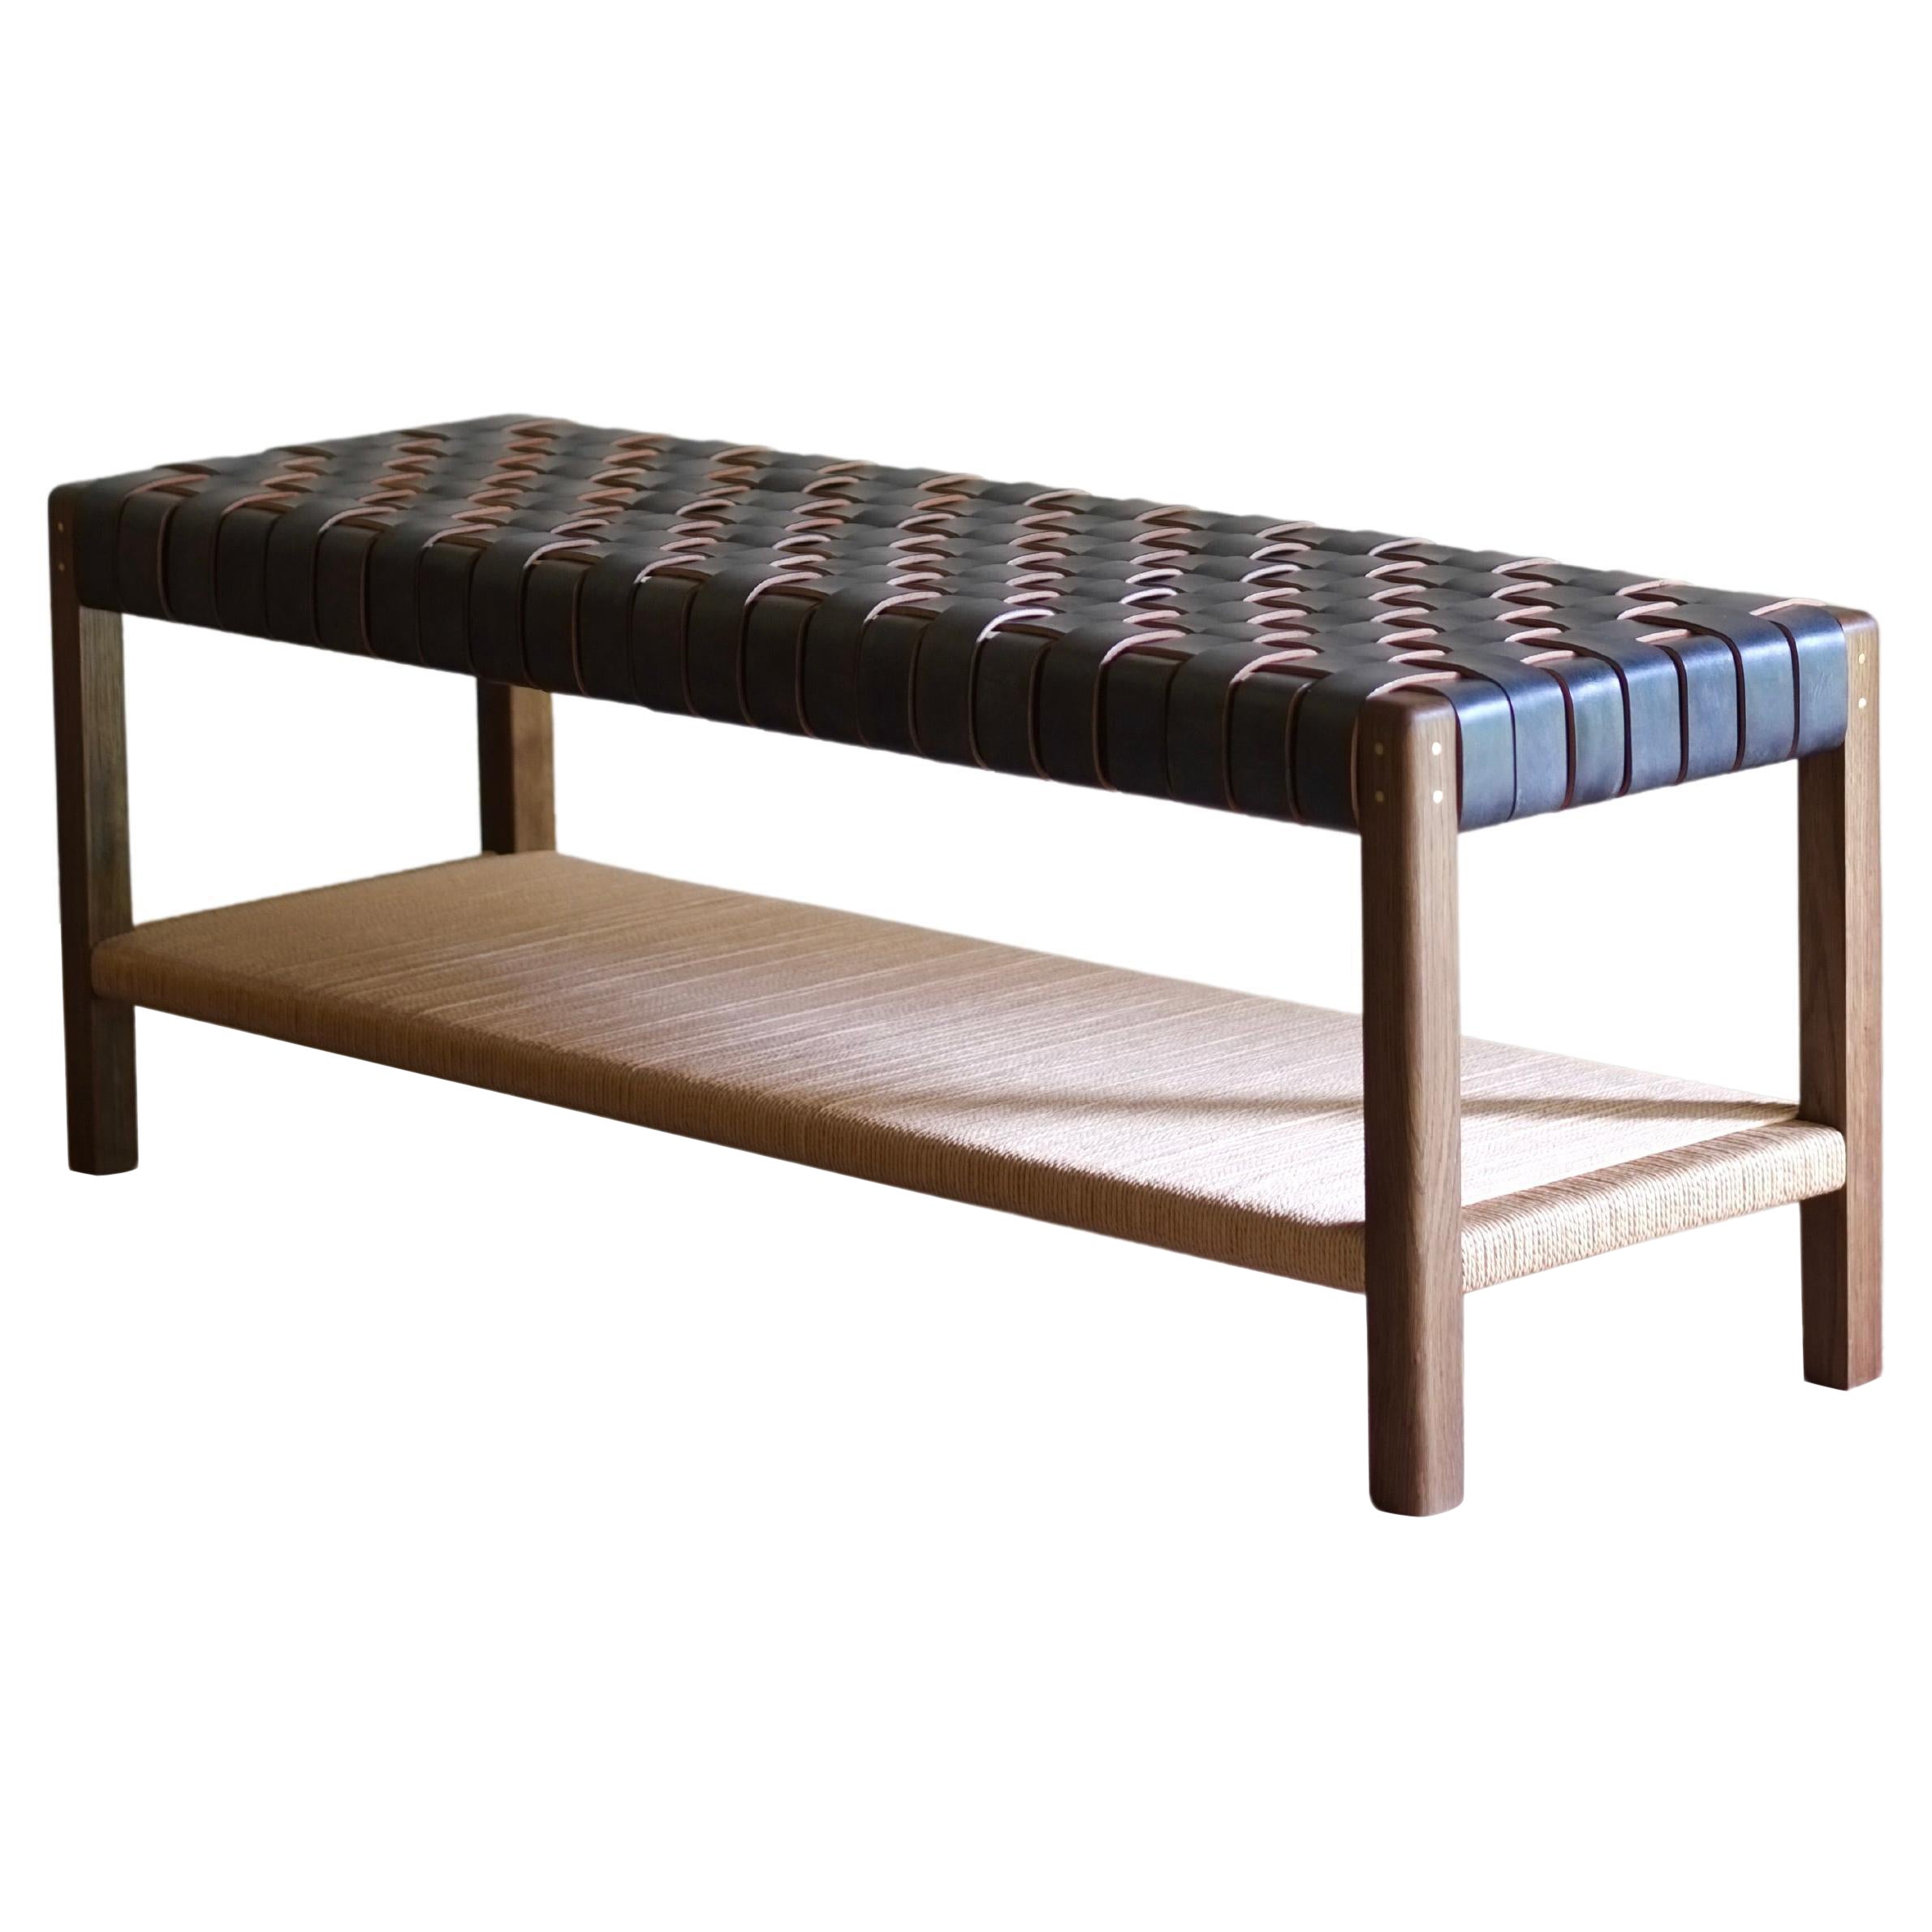 Cinch Black Woven Bridle Leather Bench For Sale